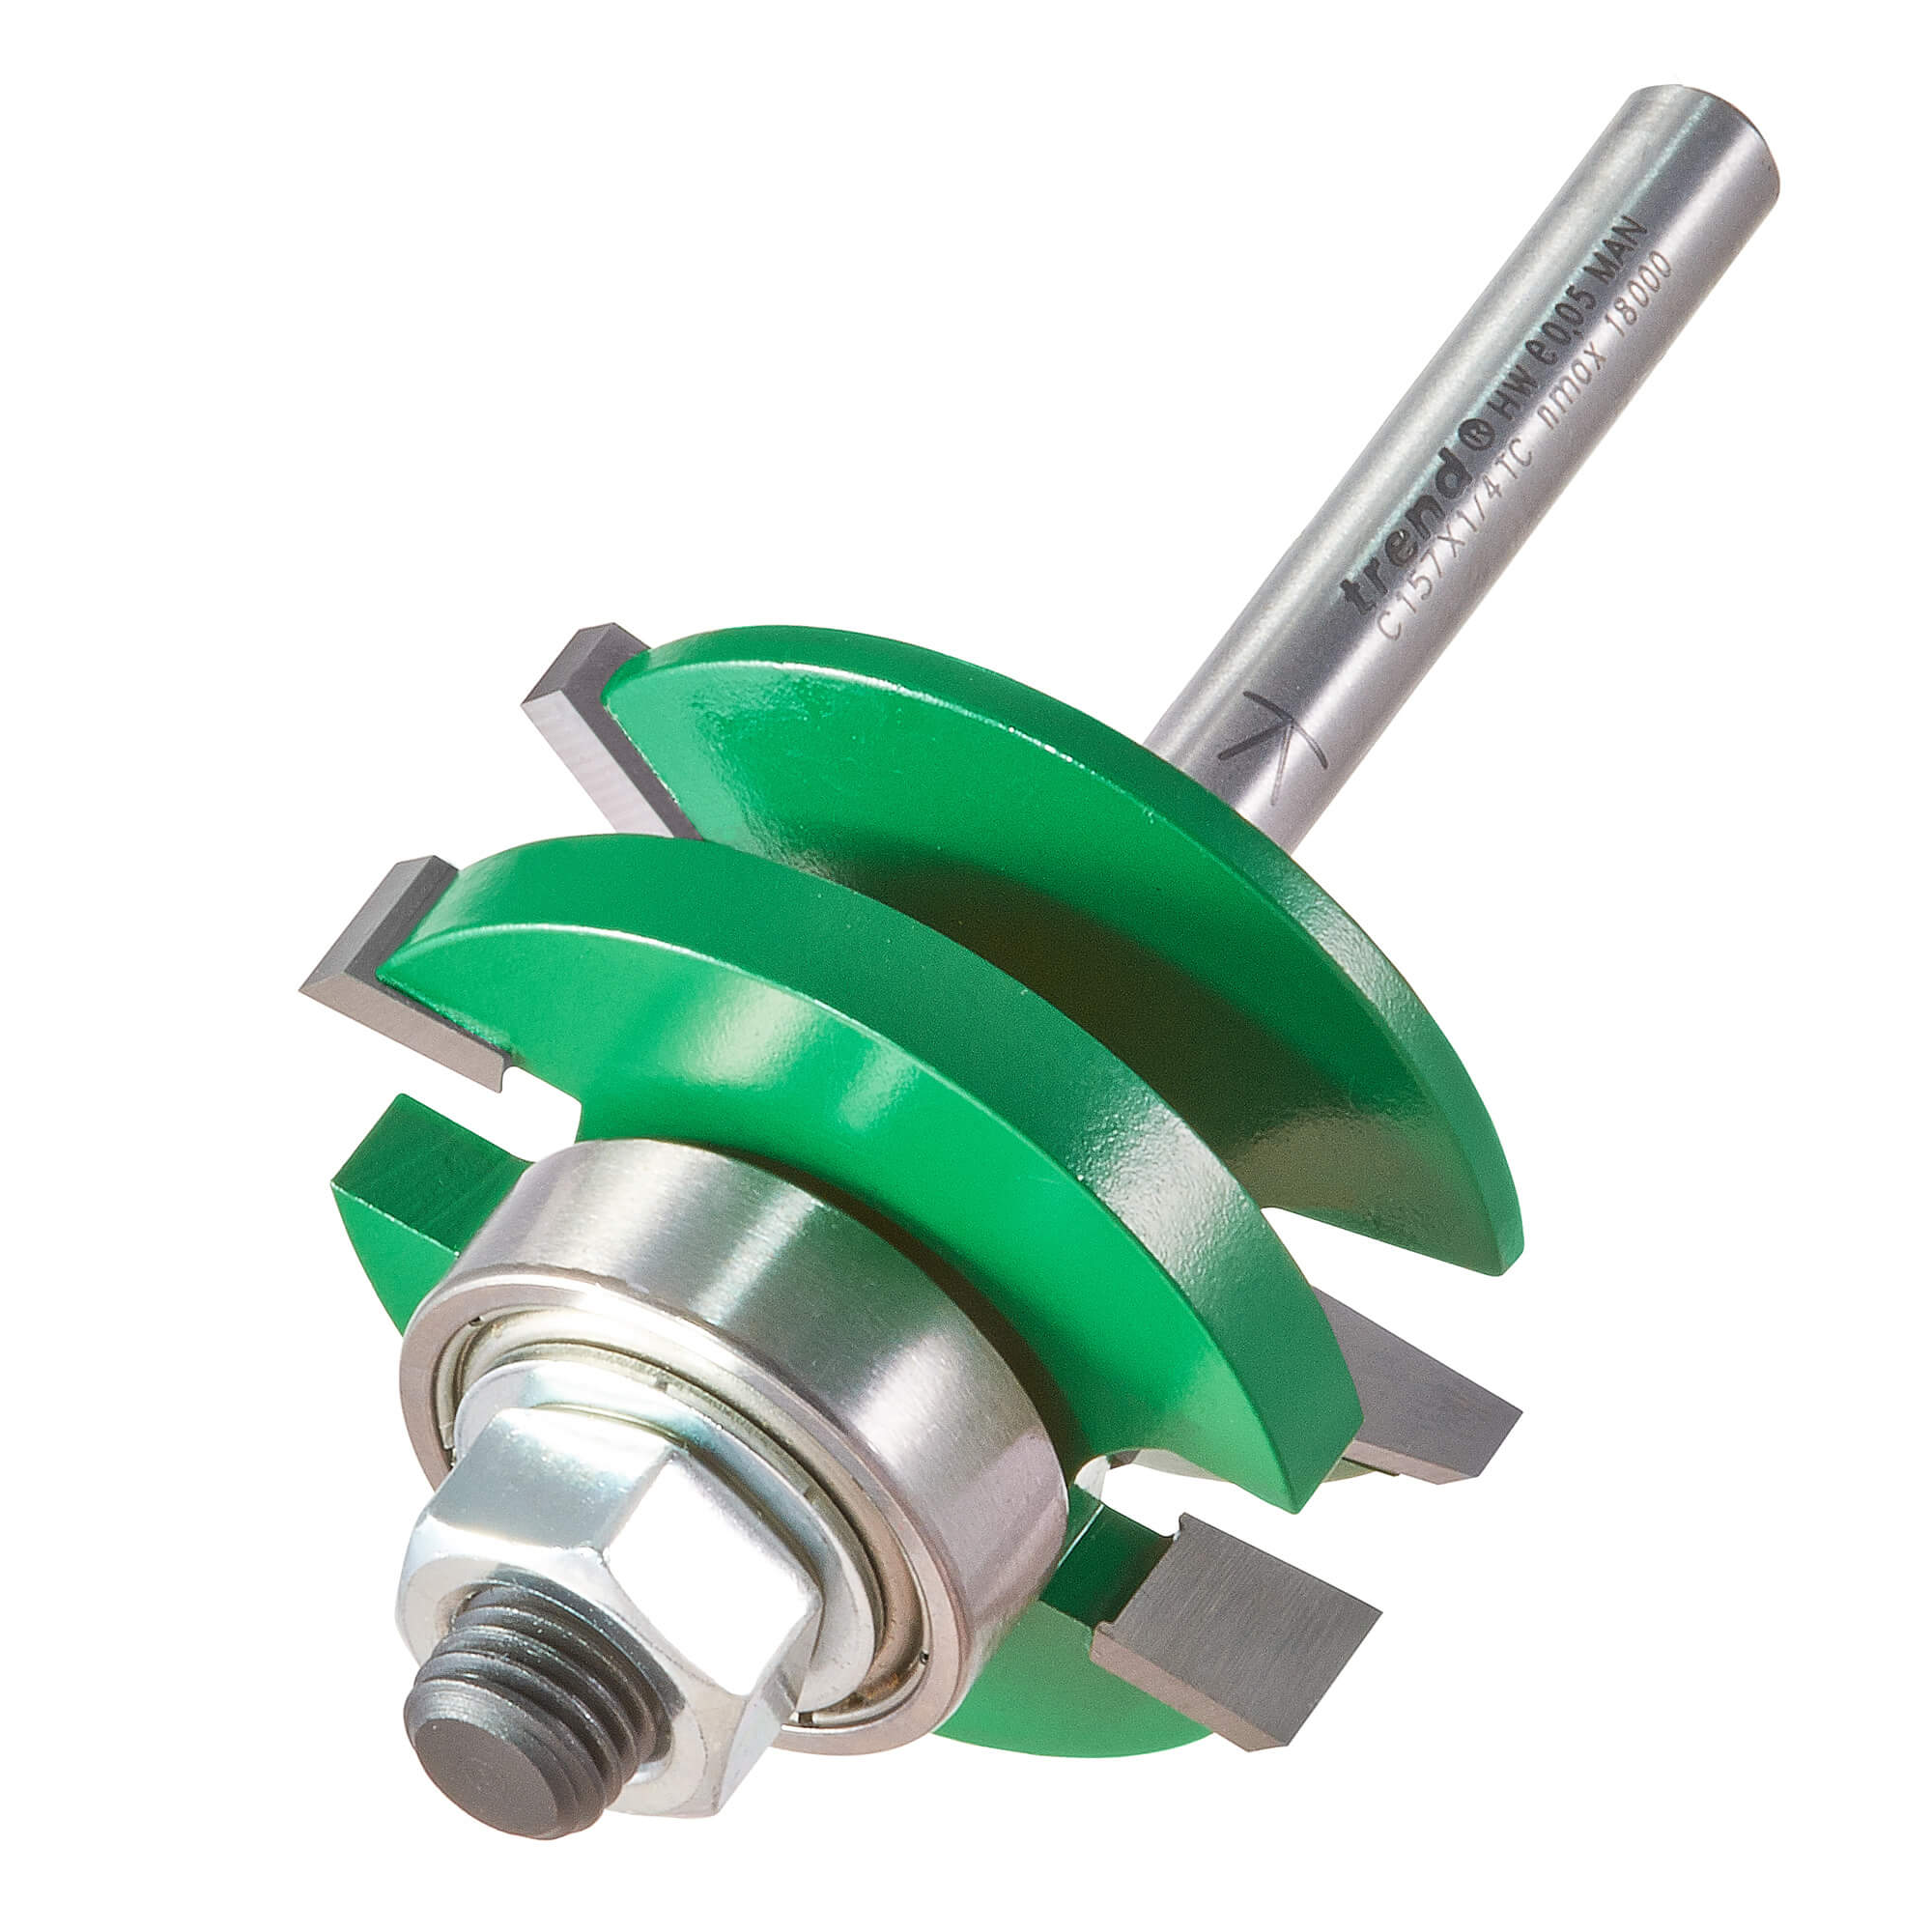 Photo of Trend Craftpro Bearing Guided Combination Raised Bevel Router Cutter 41mm 17mm 1/4